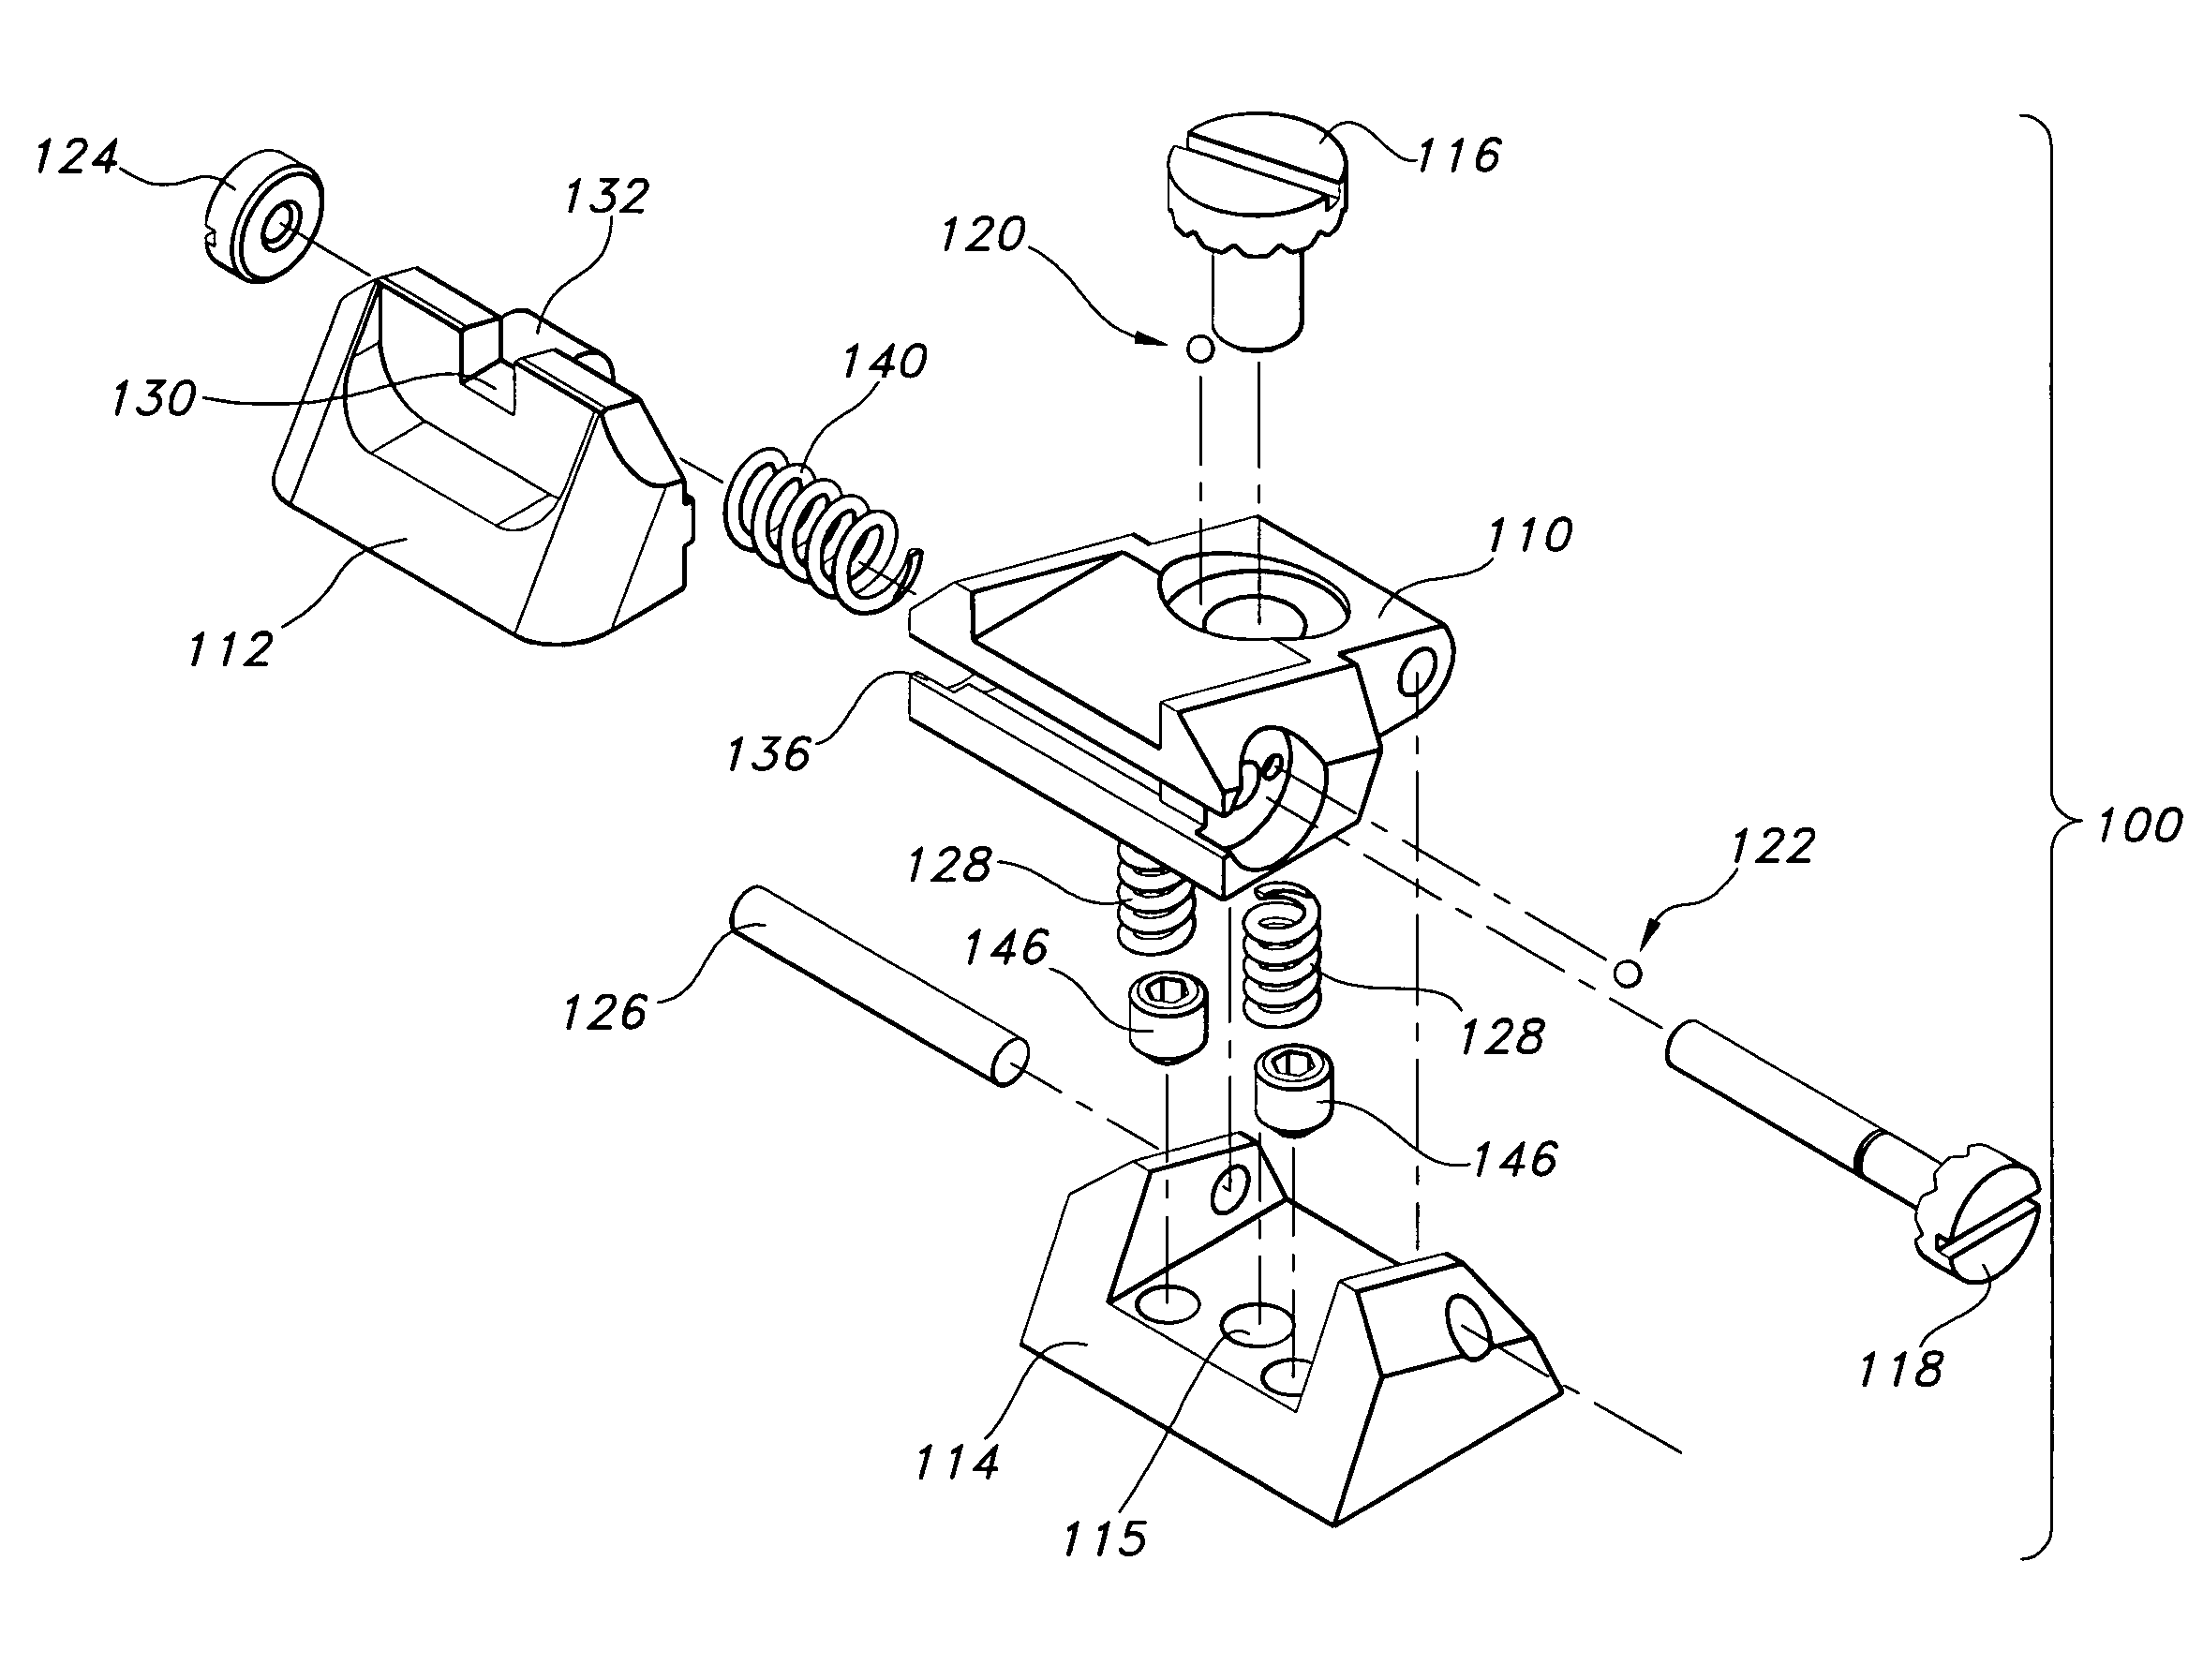 Adjustable rear pistol sight and sight mounting and adjustment method